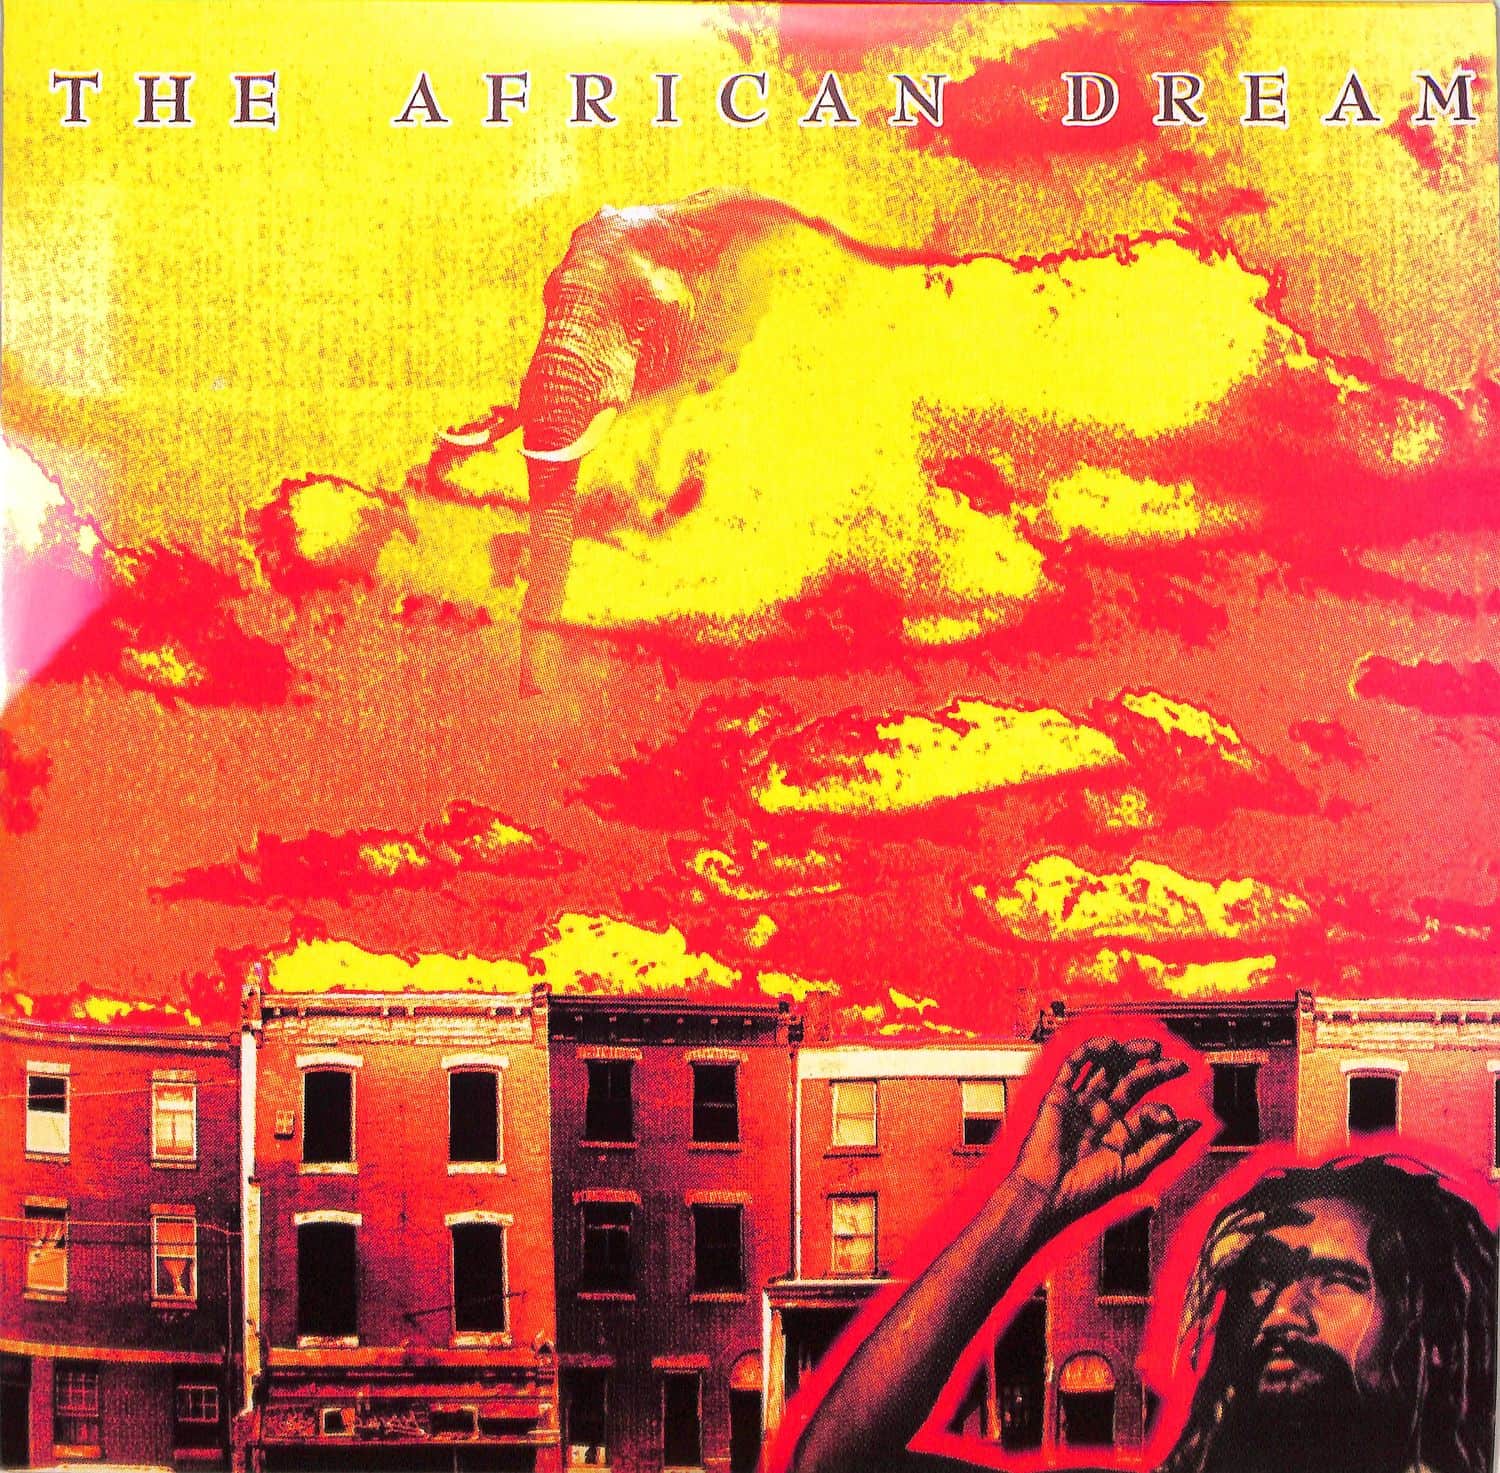 The African Dream - THE AFRICAN DREAM 